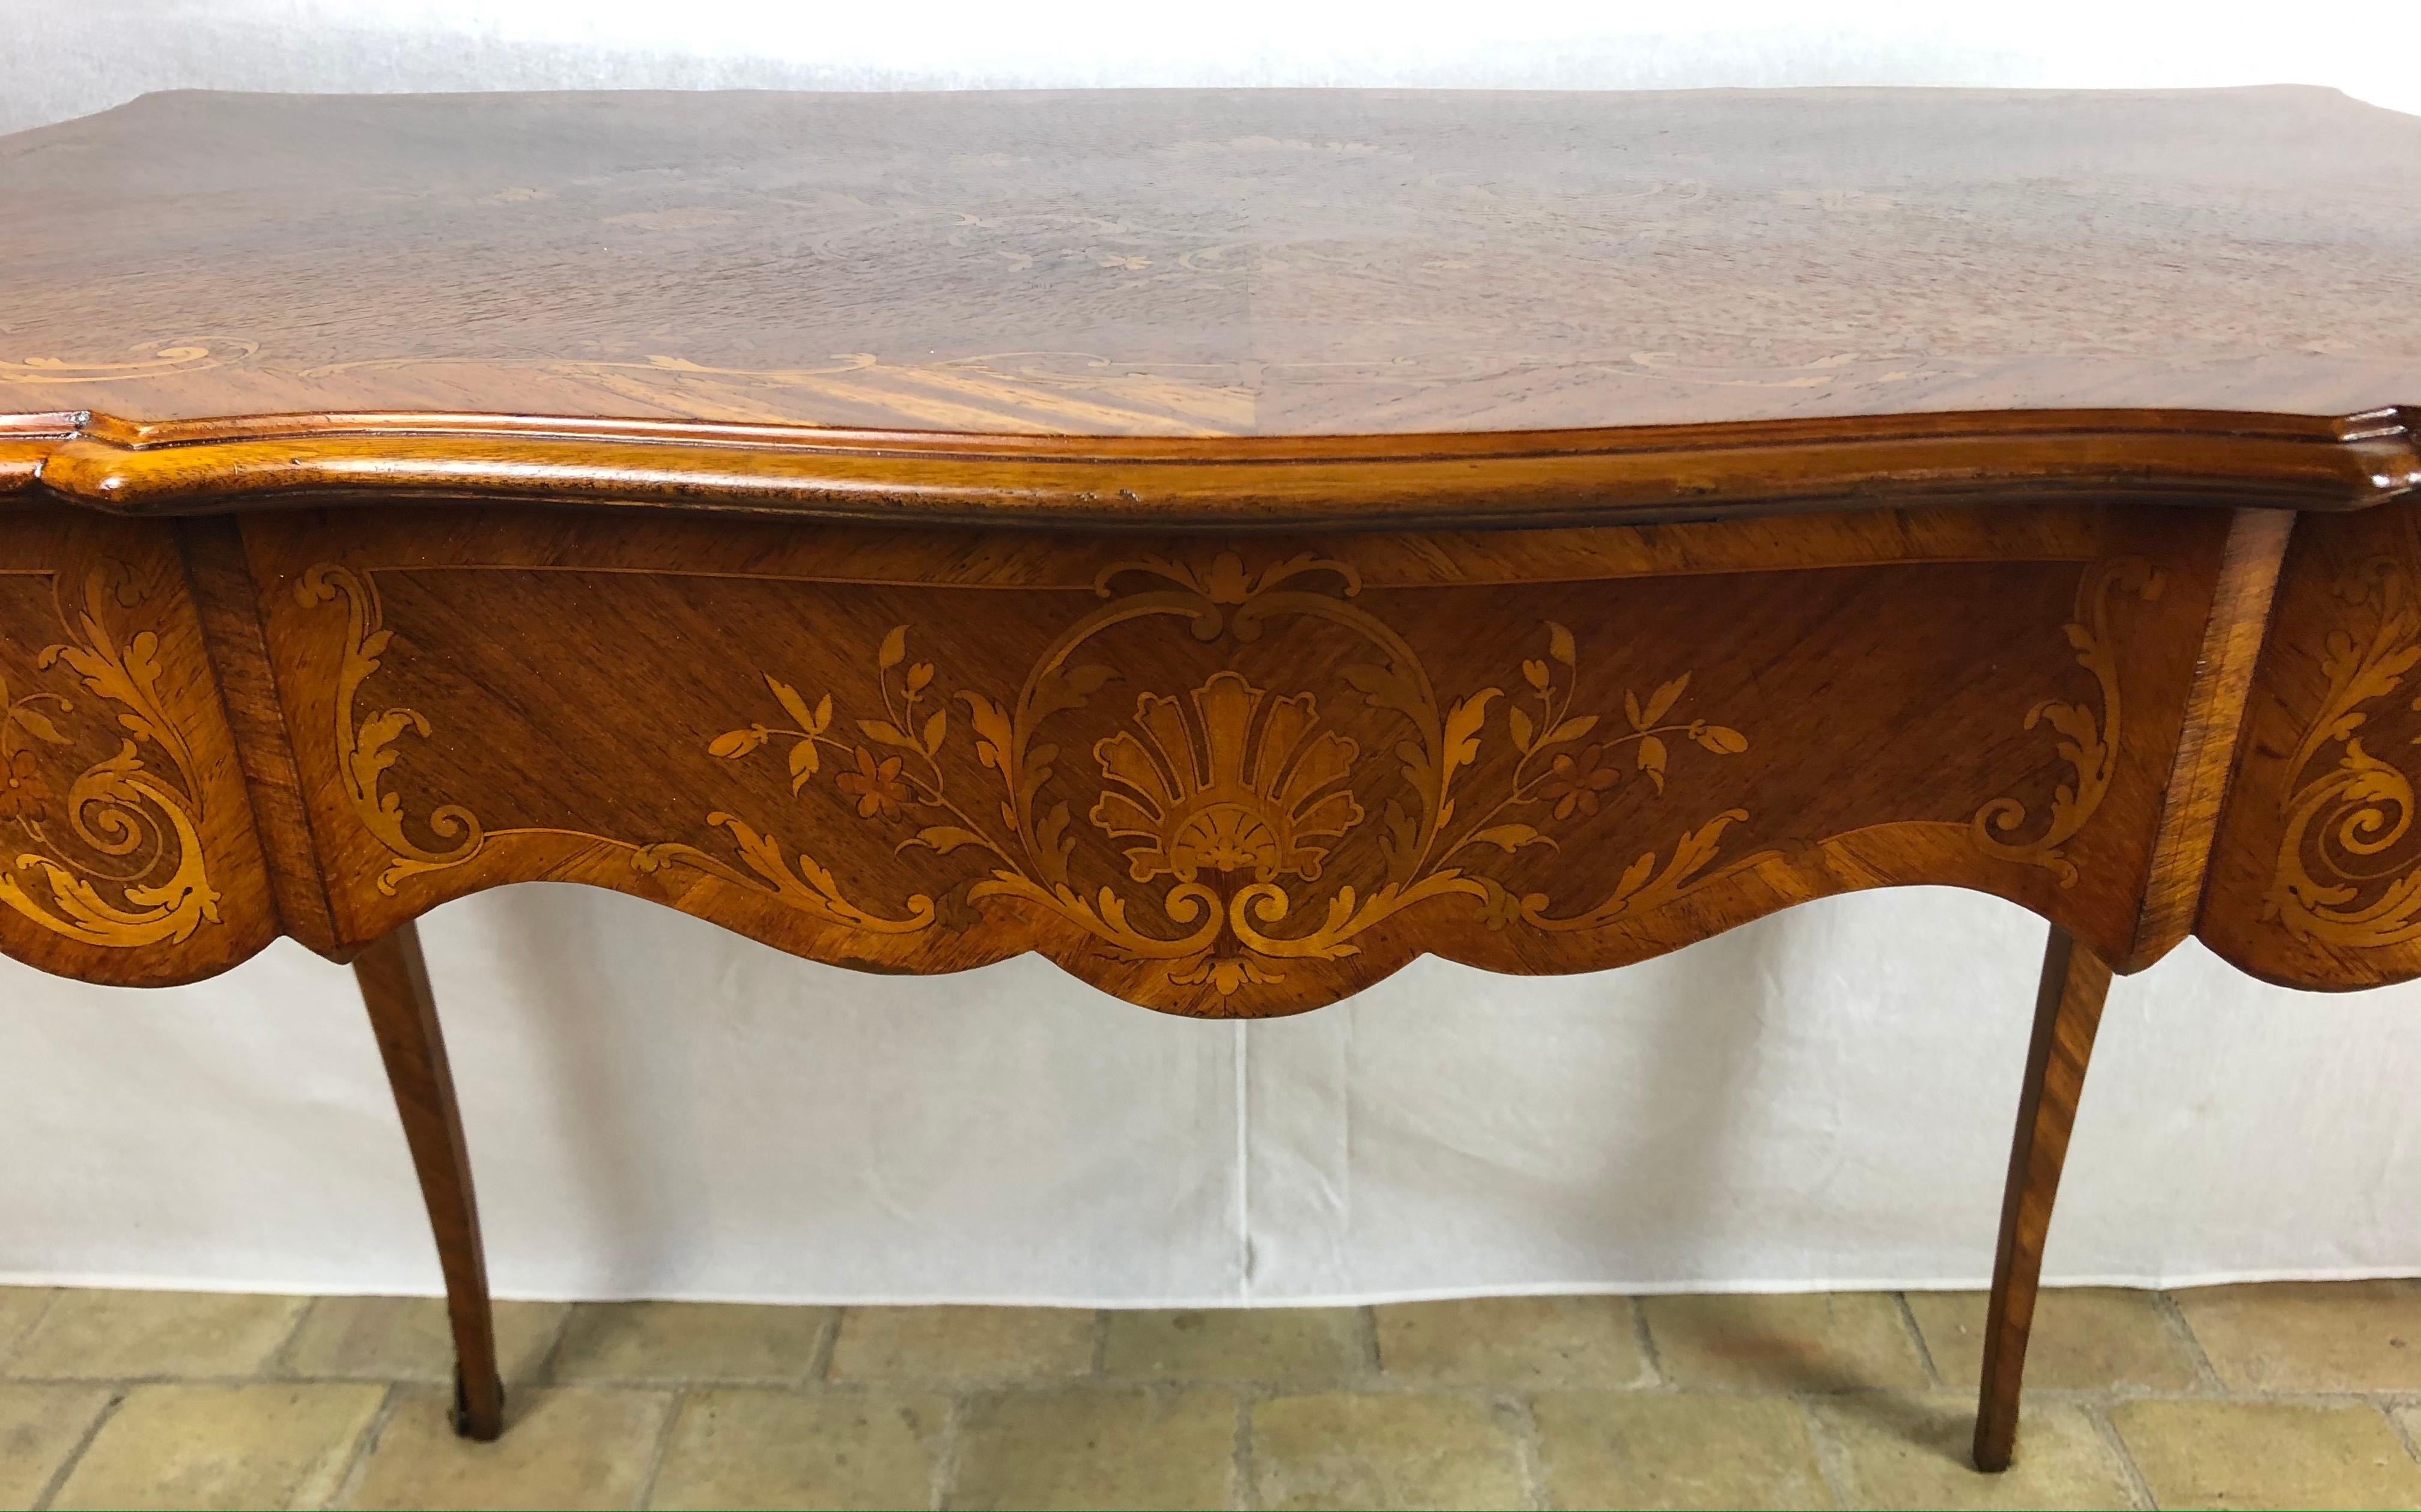 19th Century French Louis XV Style Floral Marquetry and Gilt Bronze Writing Desk For Sale 7